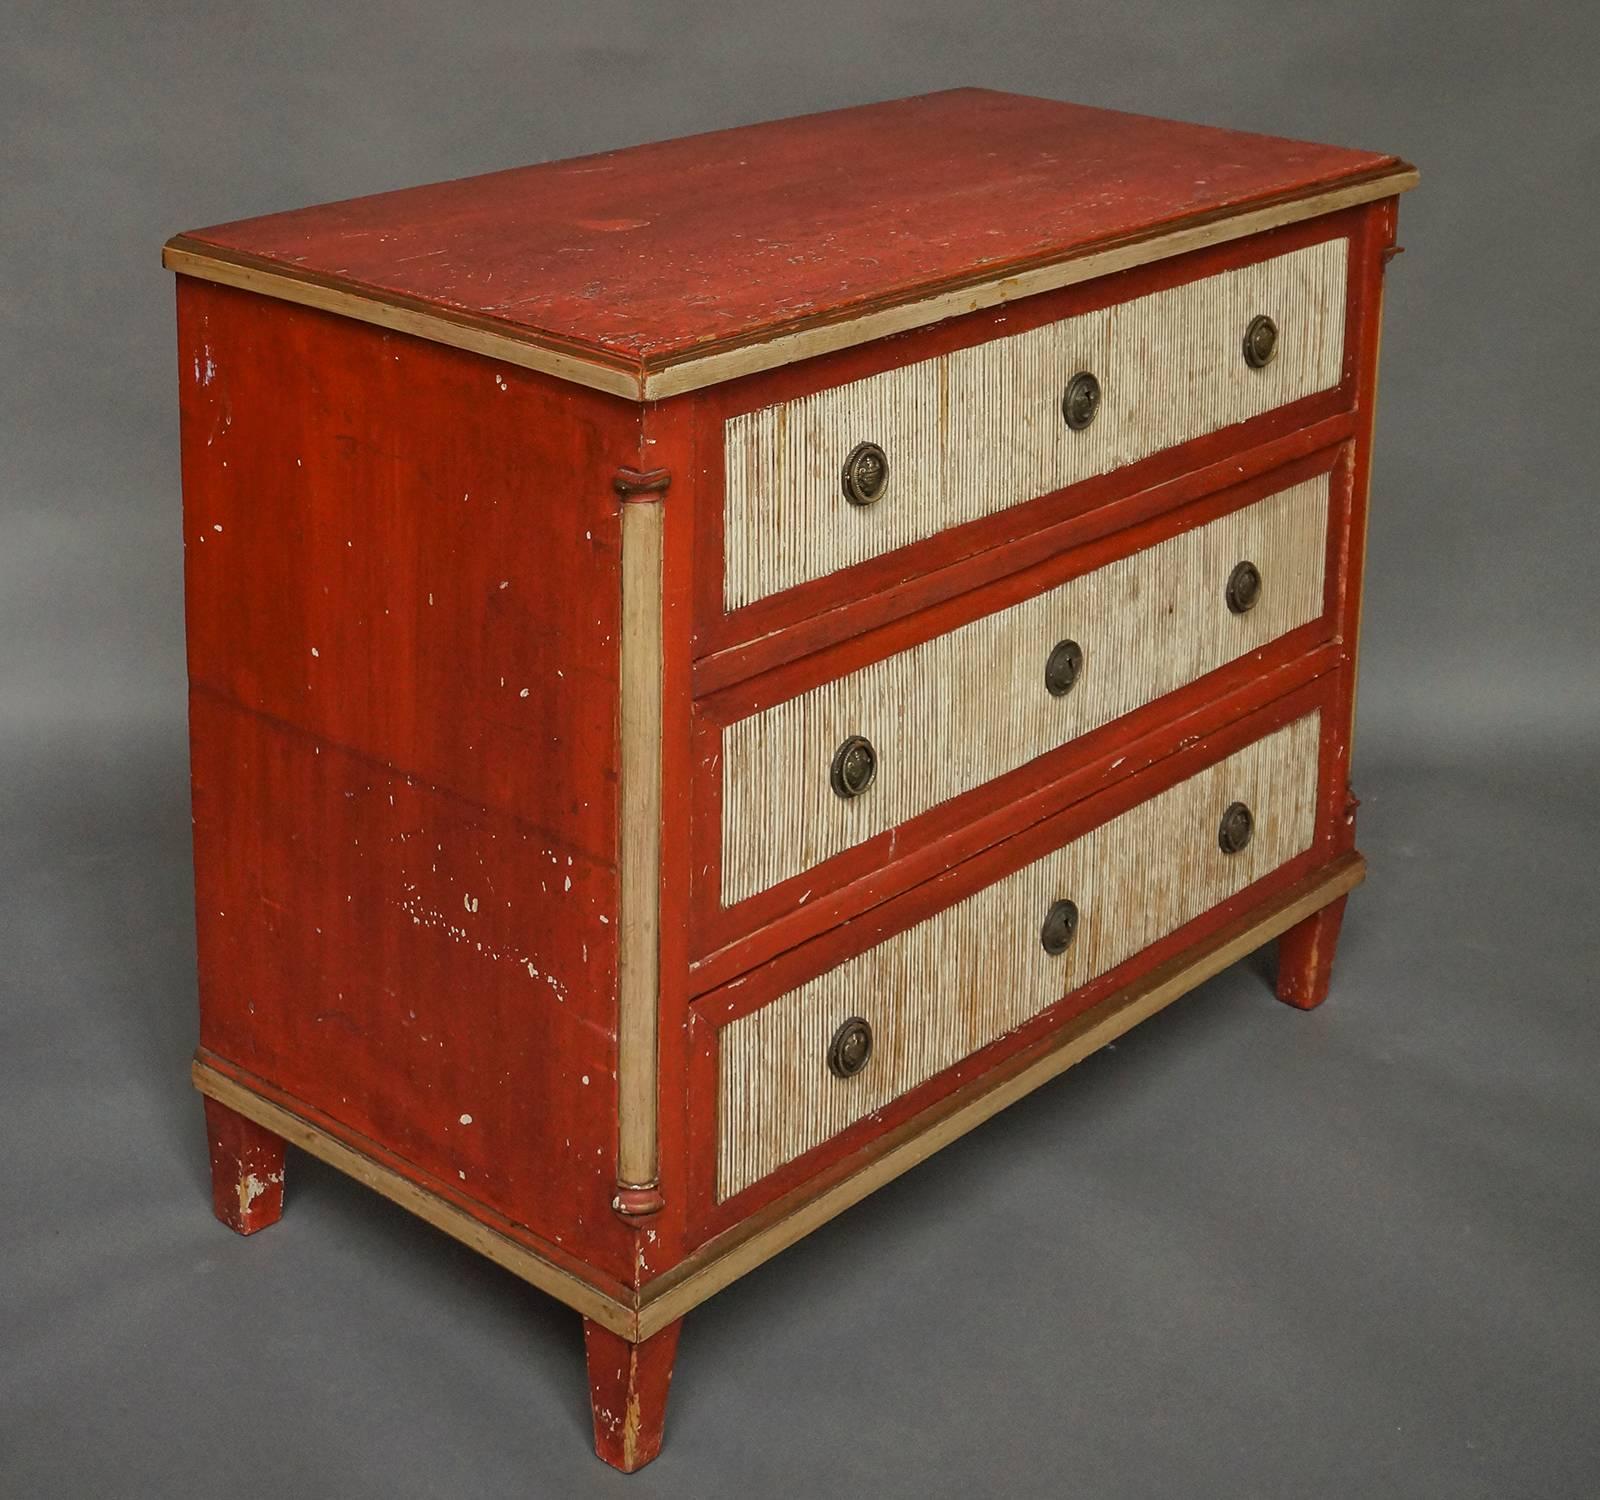 Chest of three drawers, perhaps Danish, from the neoclassical period, circa 1820, with original brass hardware and old painted surface. The drawer fronts have vertically reeded panels, and the chest corners feature quarter-round columns with simple